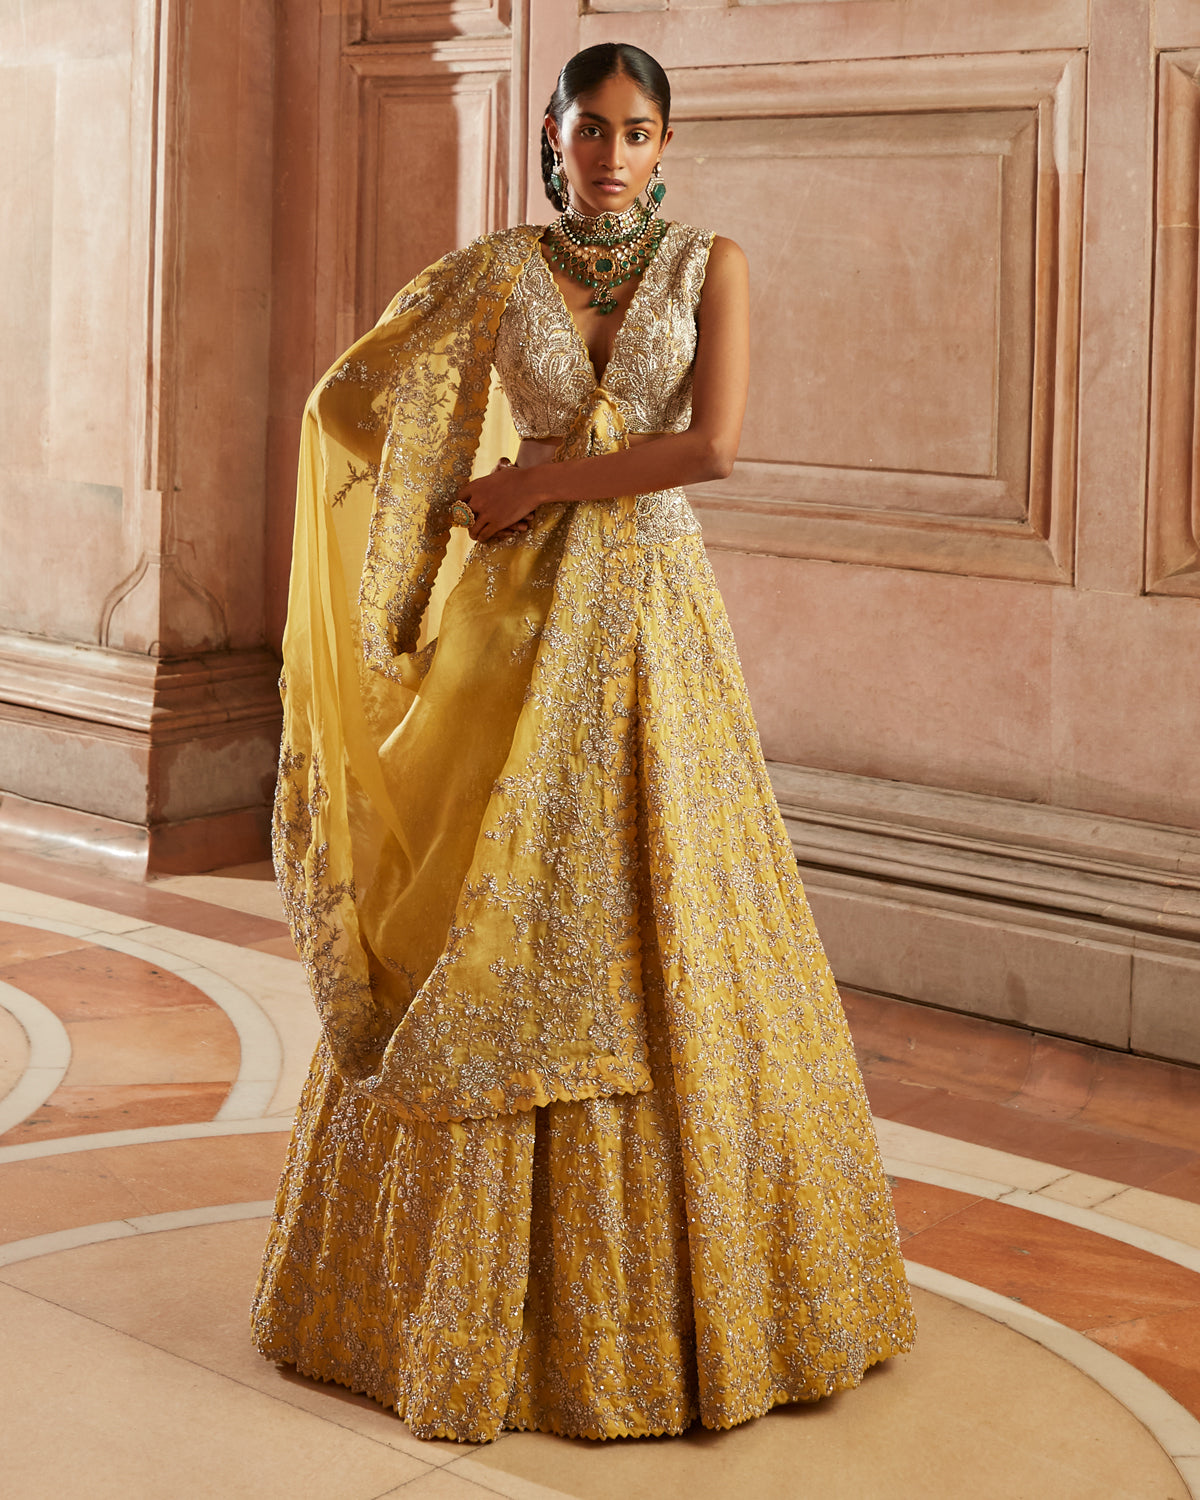 Sabyasachi - Destination weddings are quite shaping the future of bridal  wear. Taking cues from our heritage, and marrying them to contemporary  needs, we at Sabyasachi are constantly redefining Indian bridal wear. '